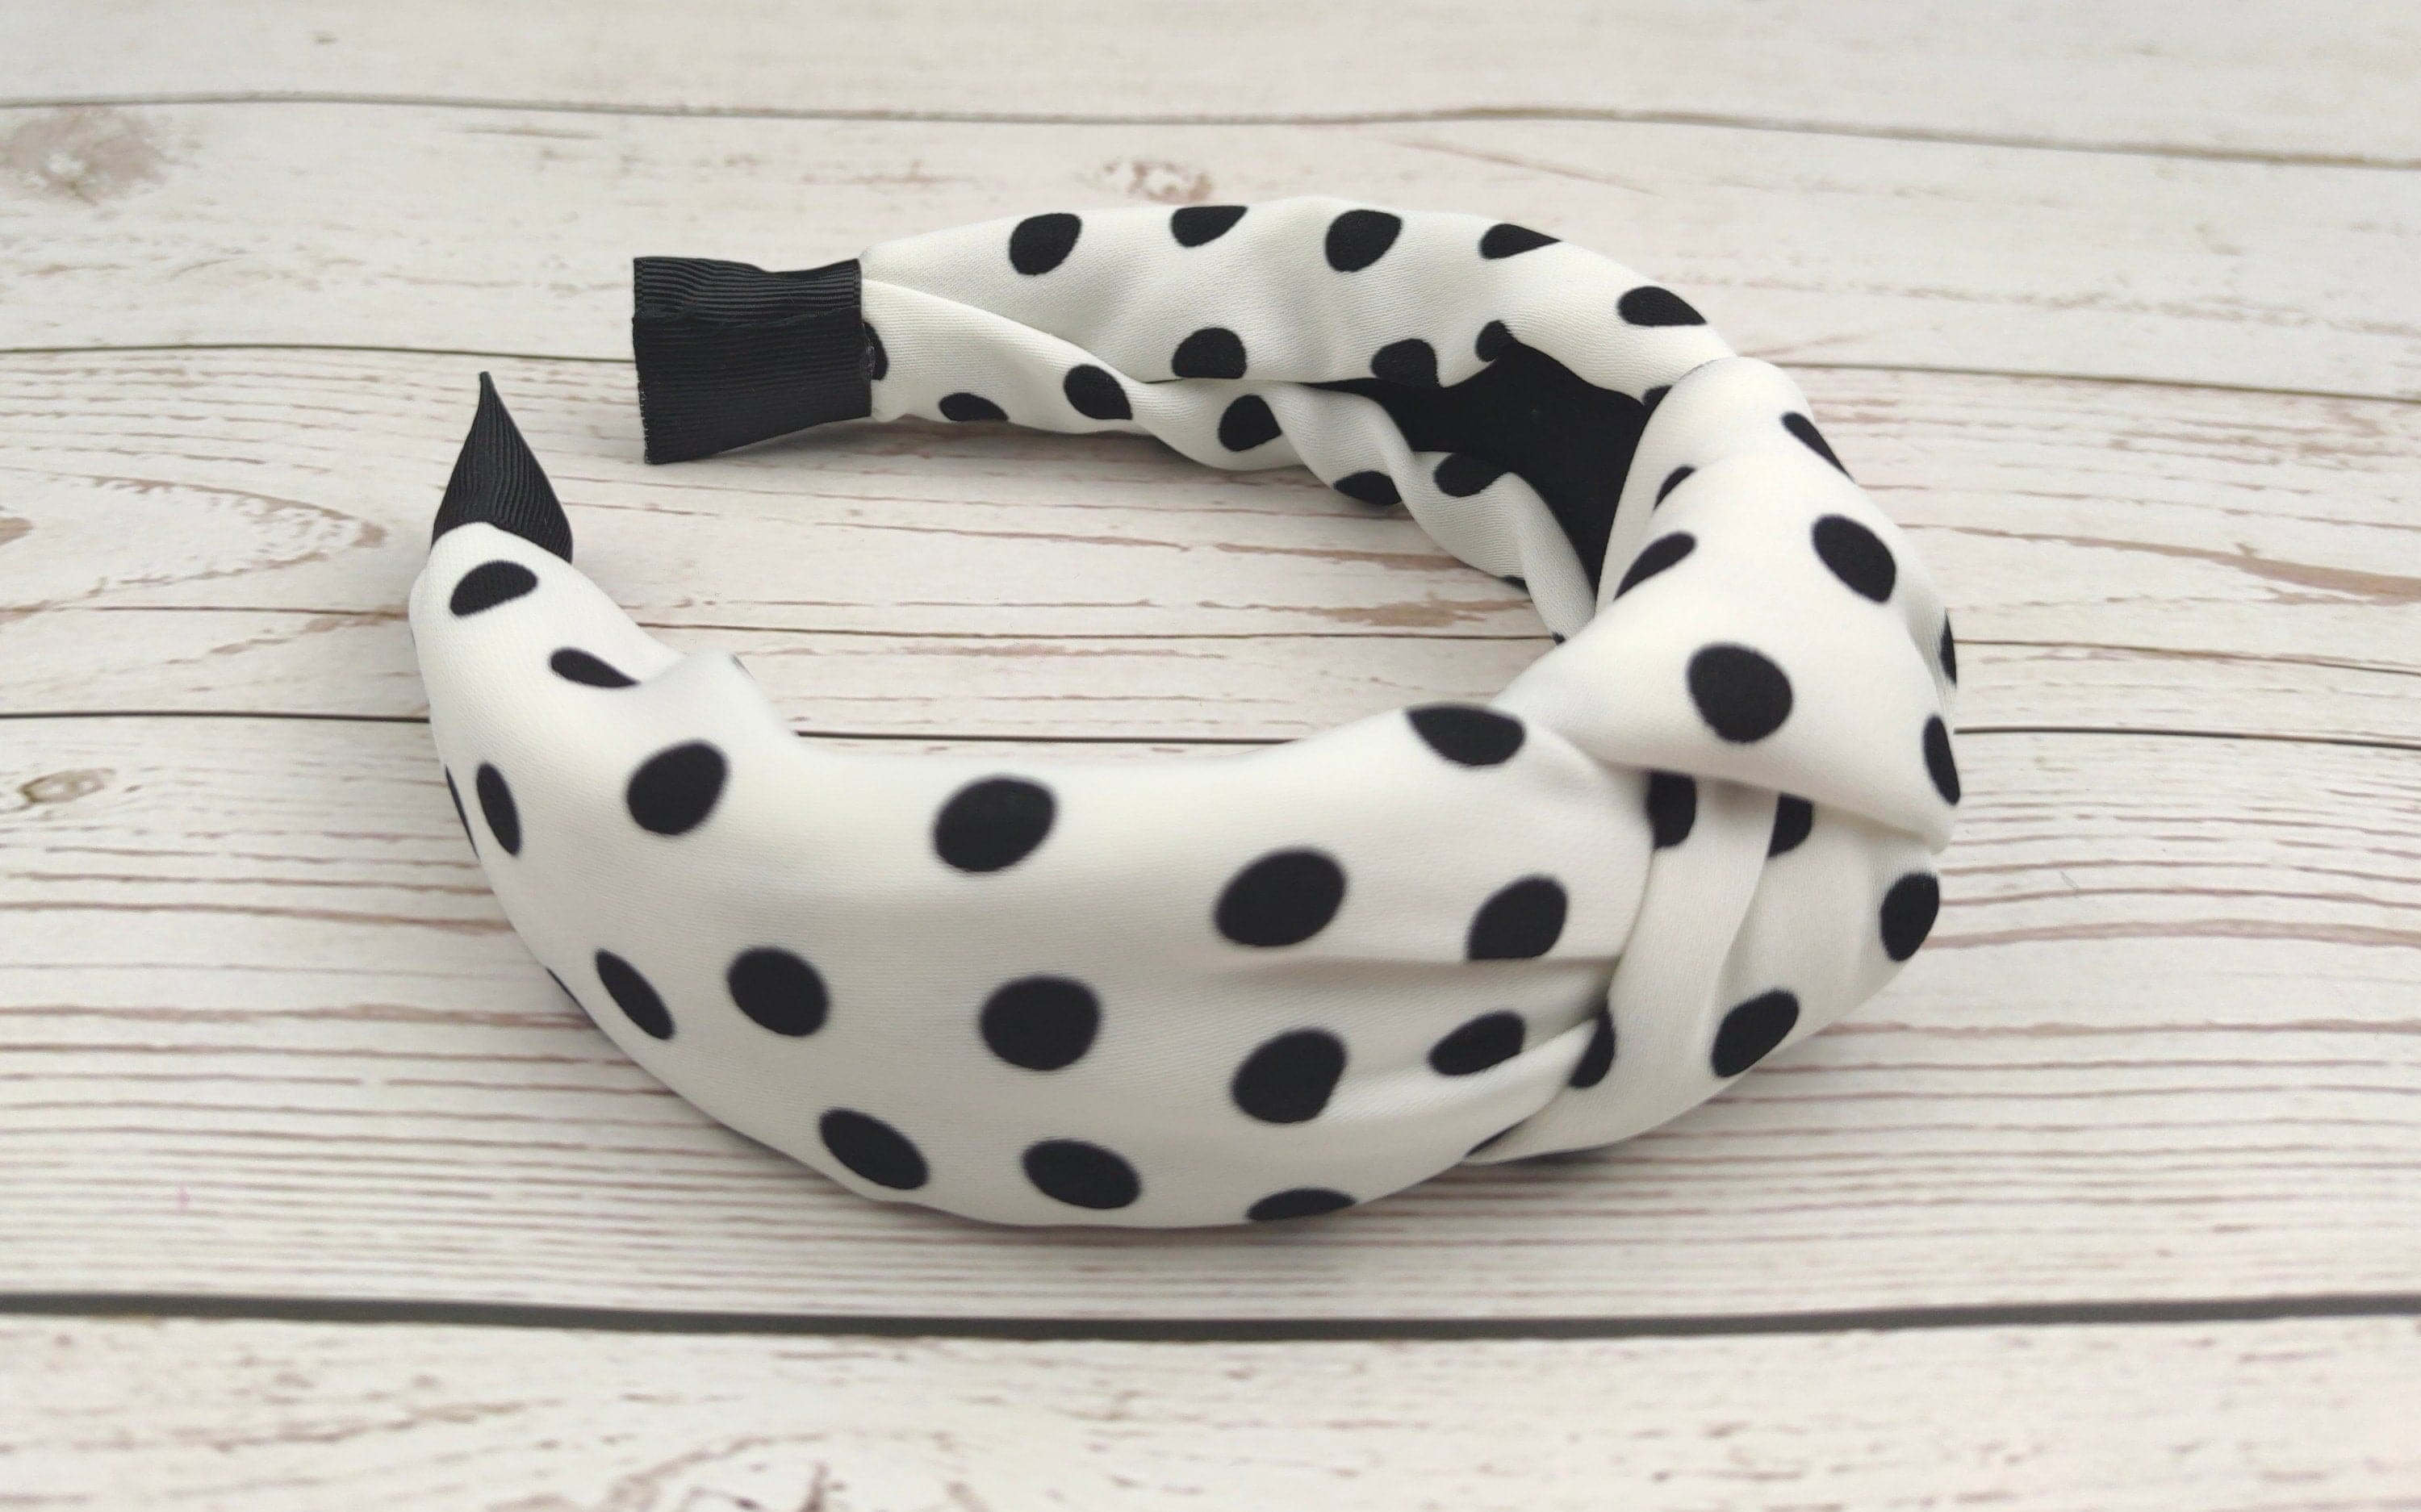 Are you looking for the perfect gift? Check out our range of best gift friend headbands! From wide headbands to knot headbands, we have something for everyone.